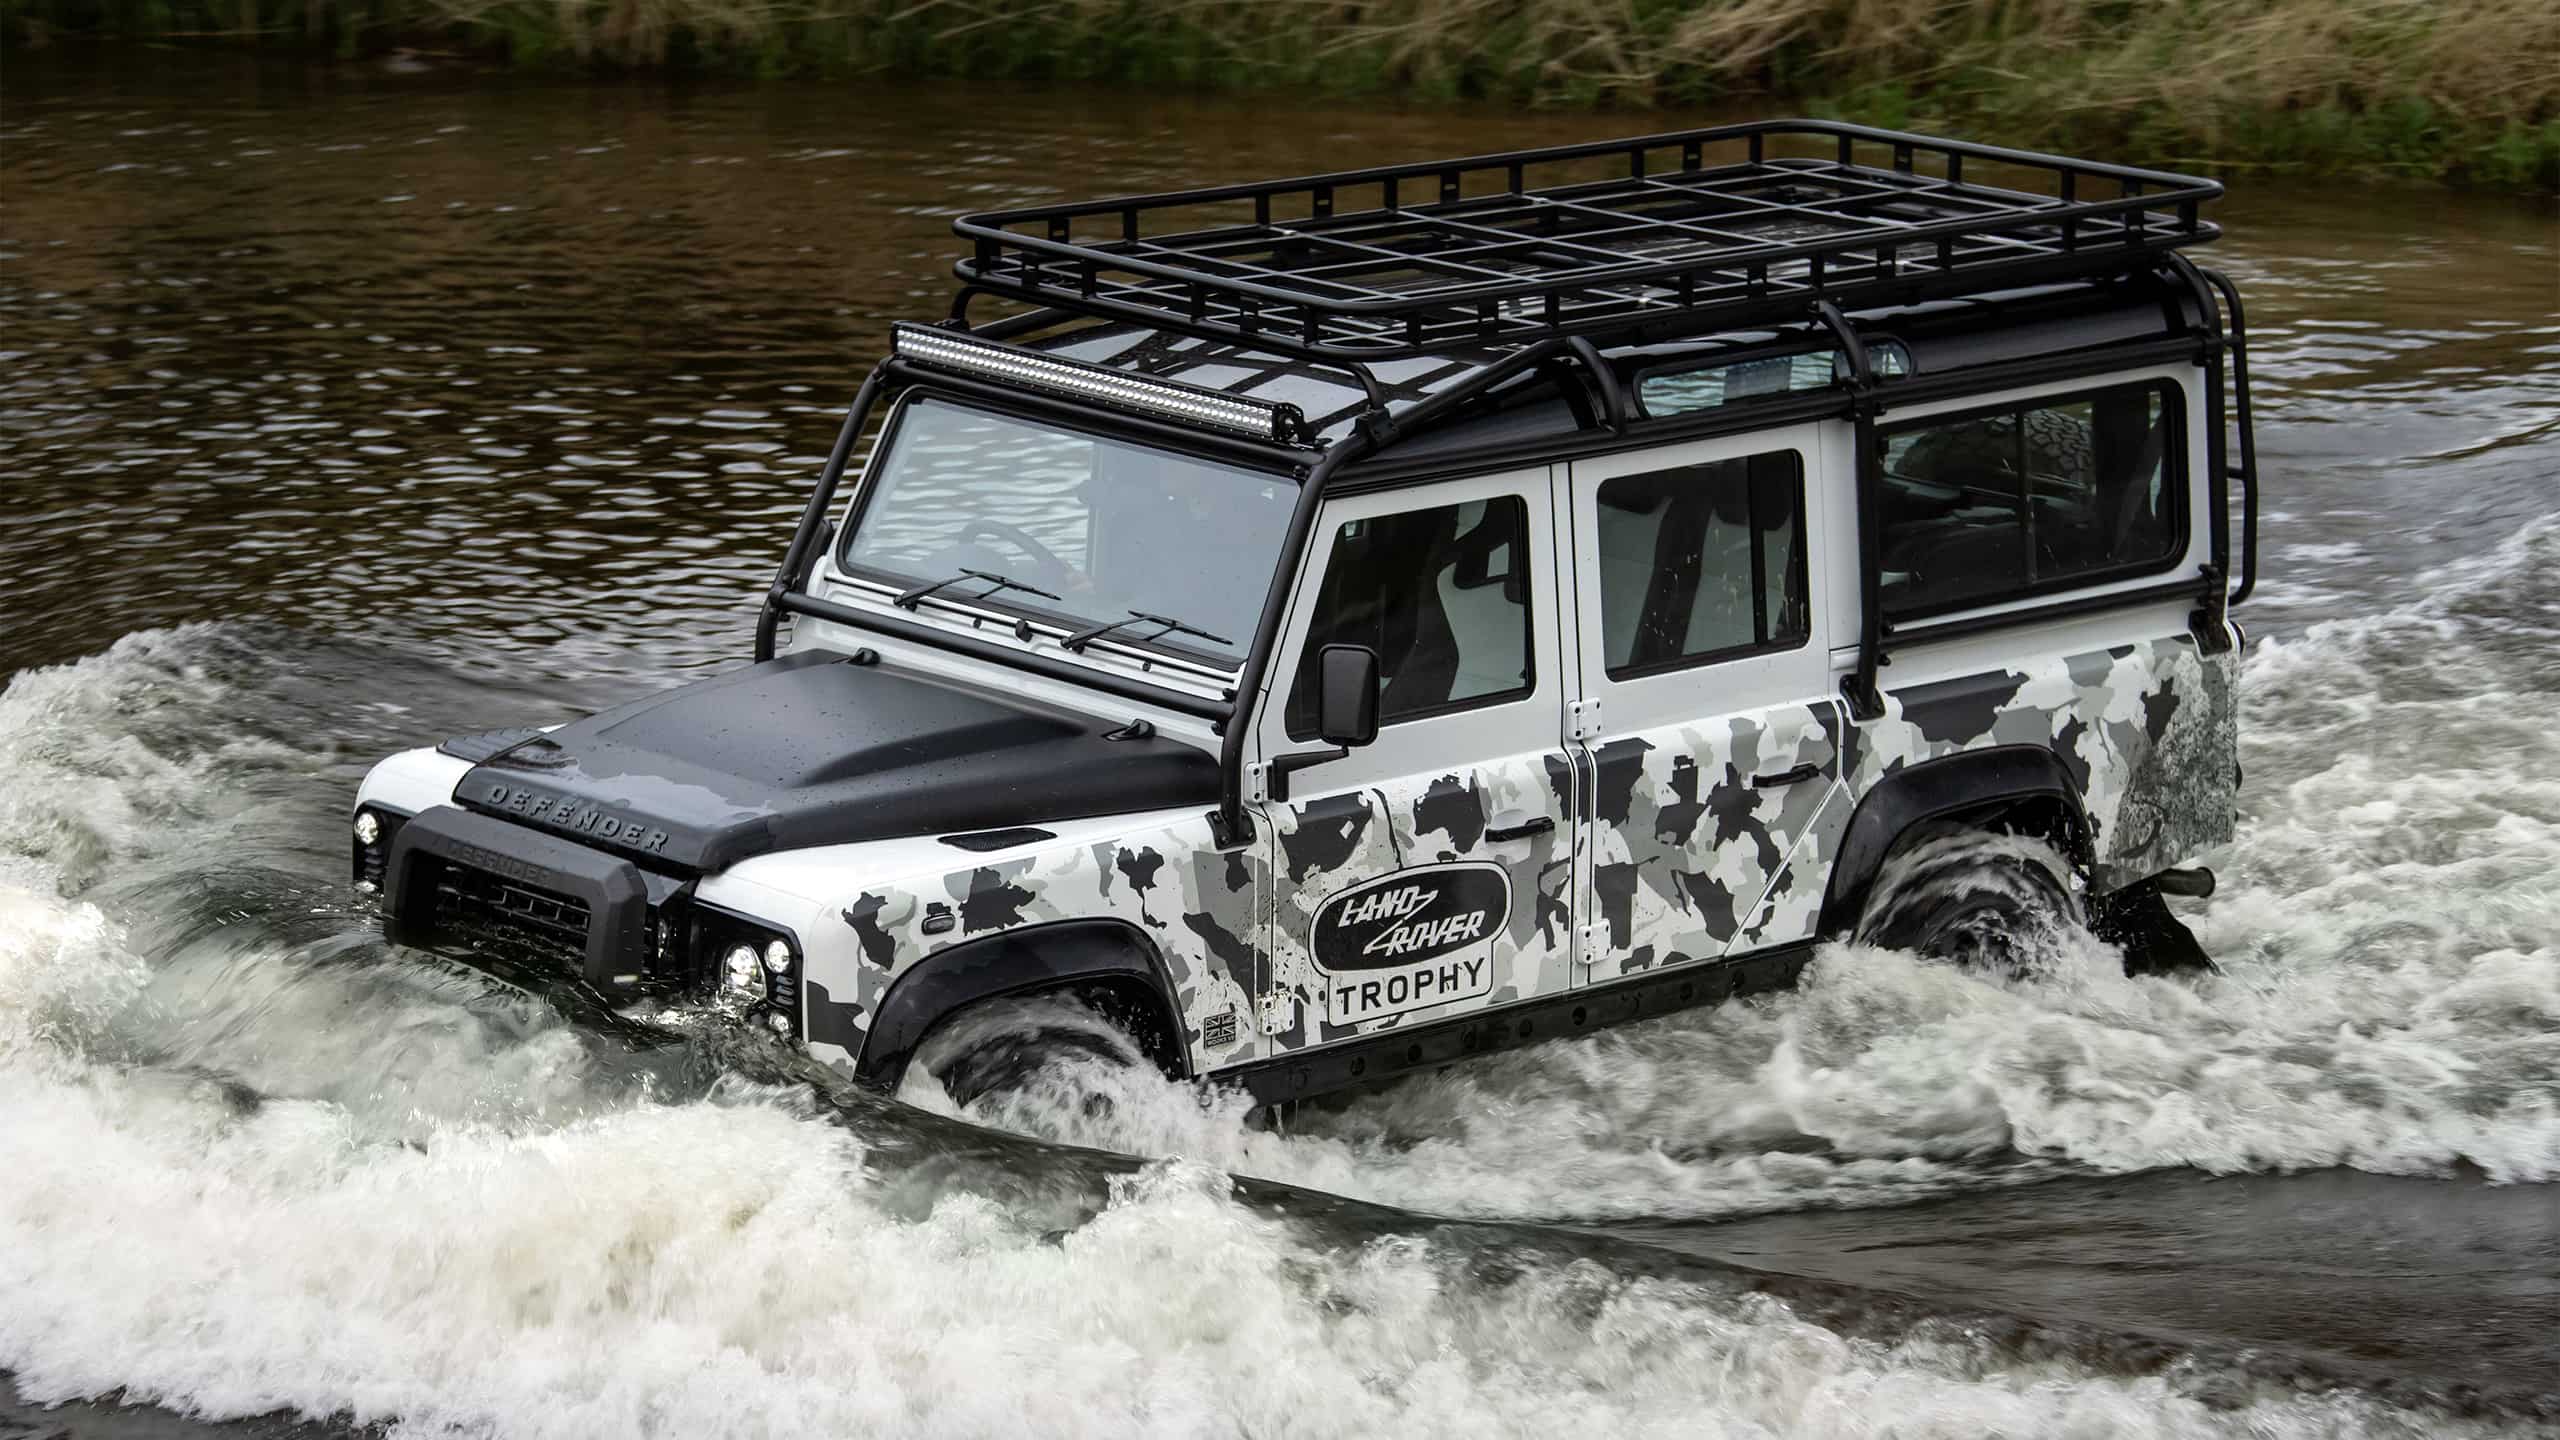 Defender classic car in the river 